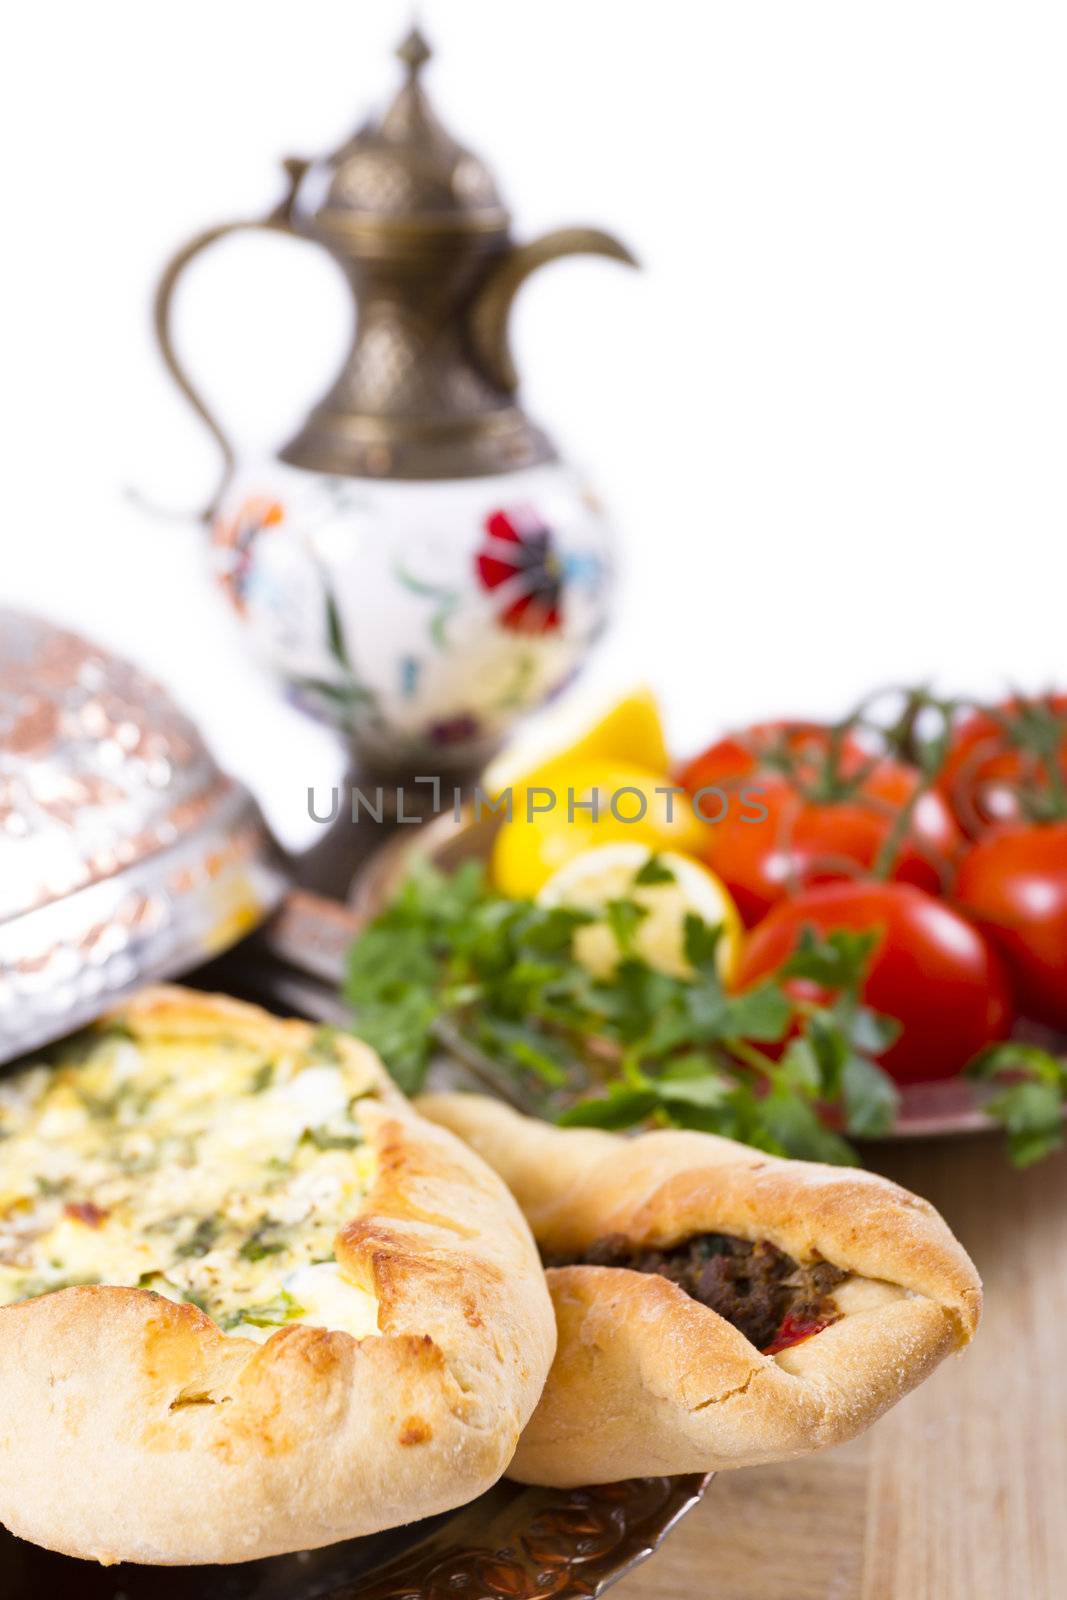 Turkish Pide garnished with vegetables by coskun